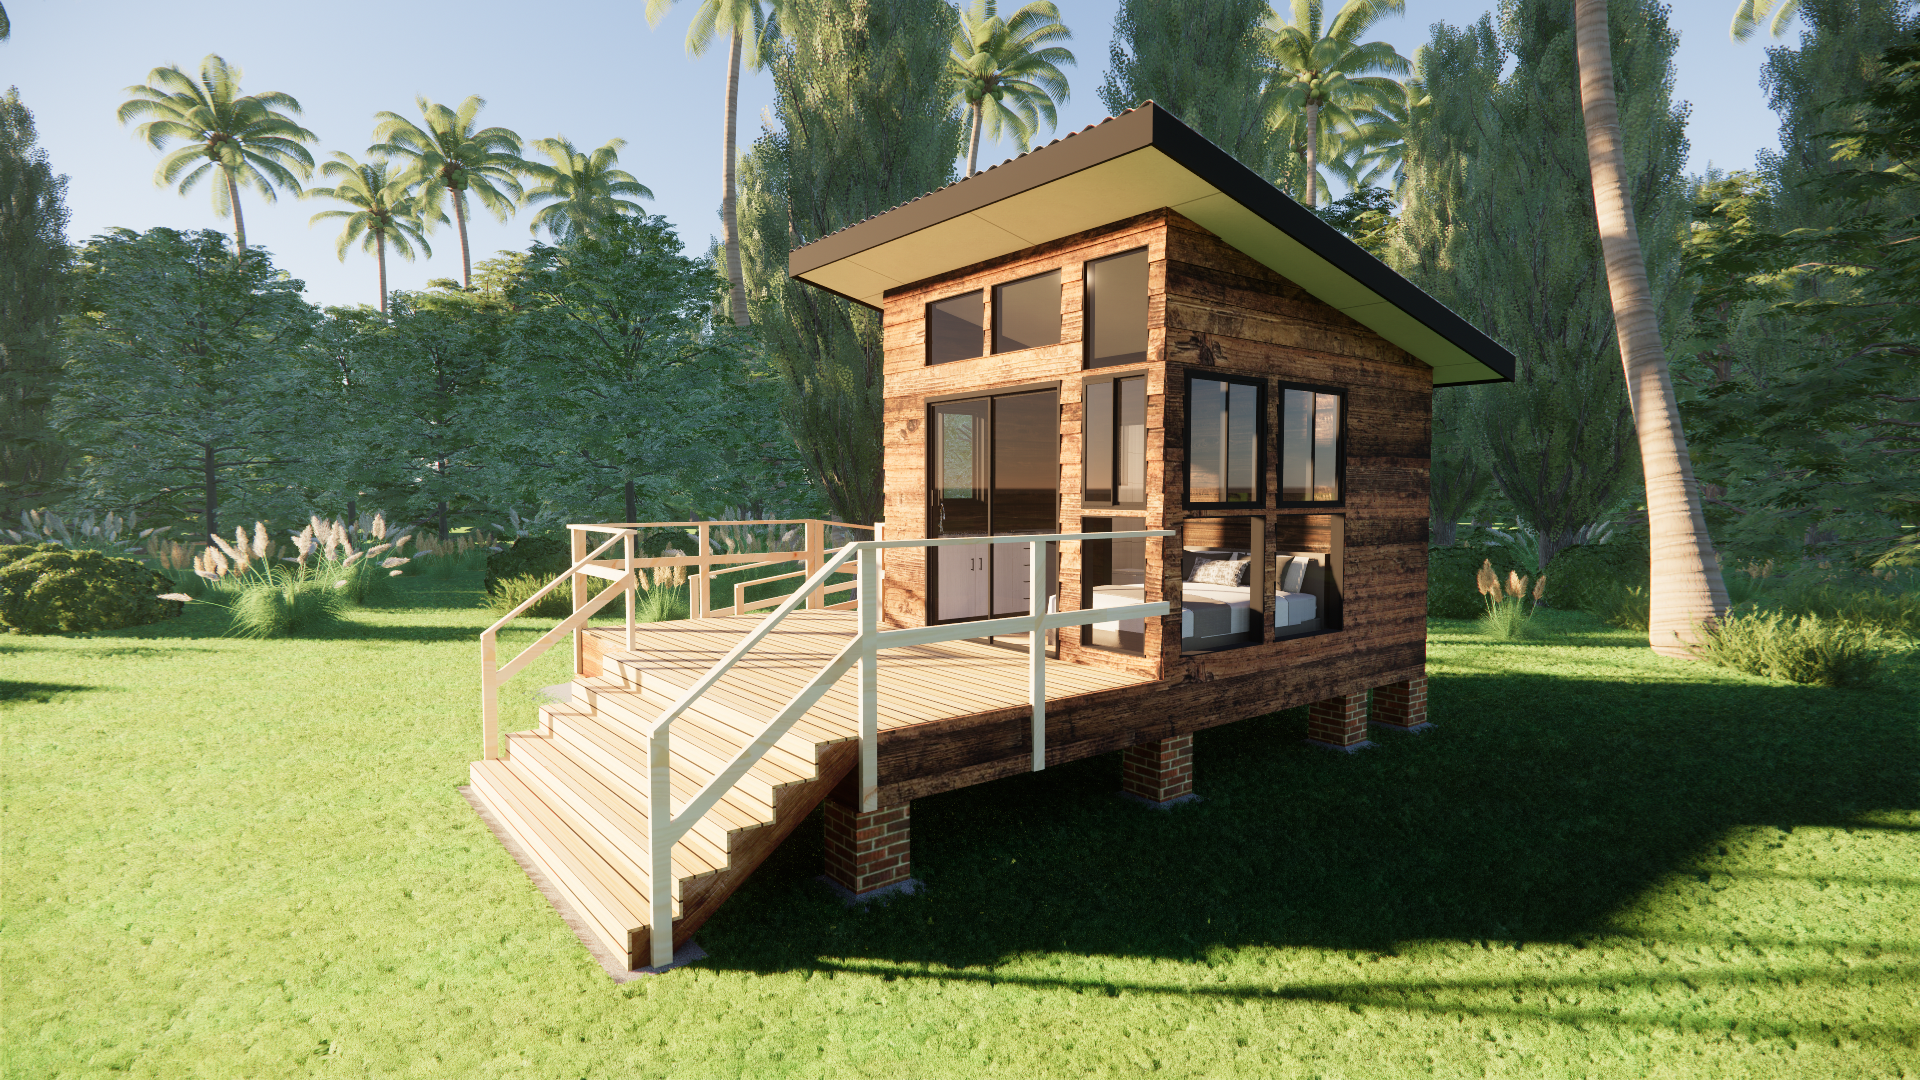 Classic Cabin Tiny - 13m2 Cabin Plans